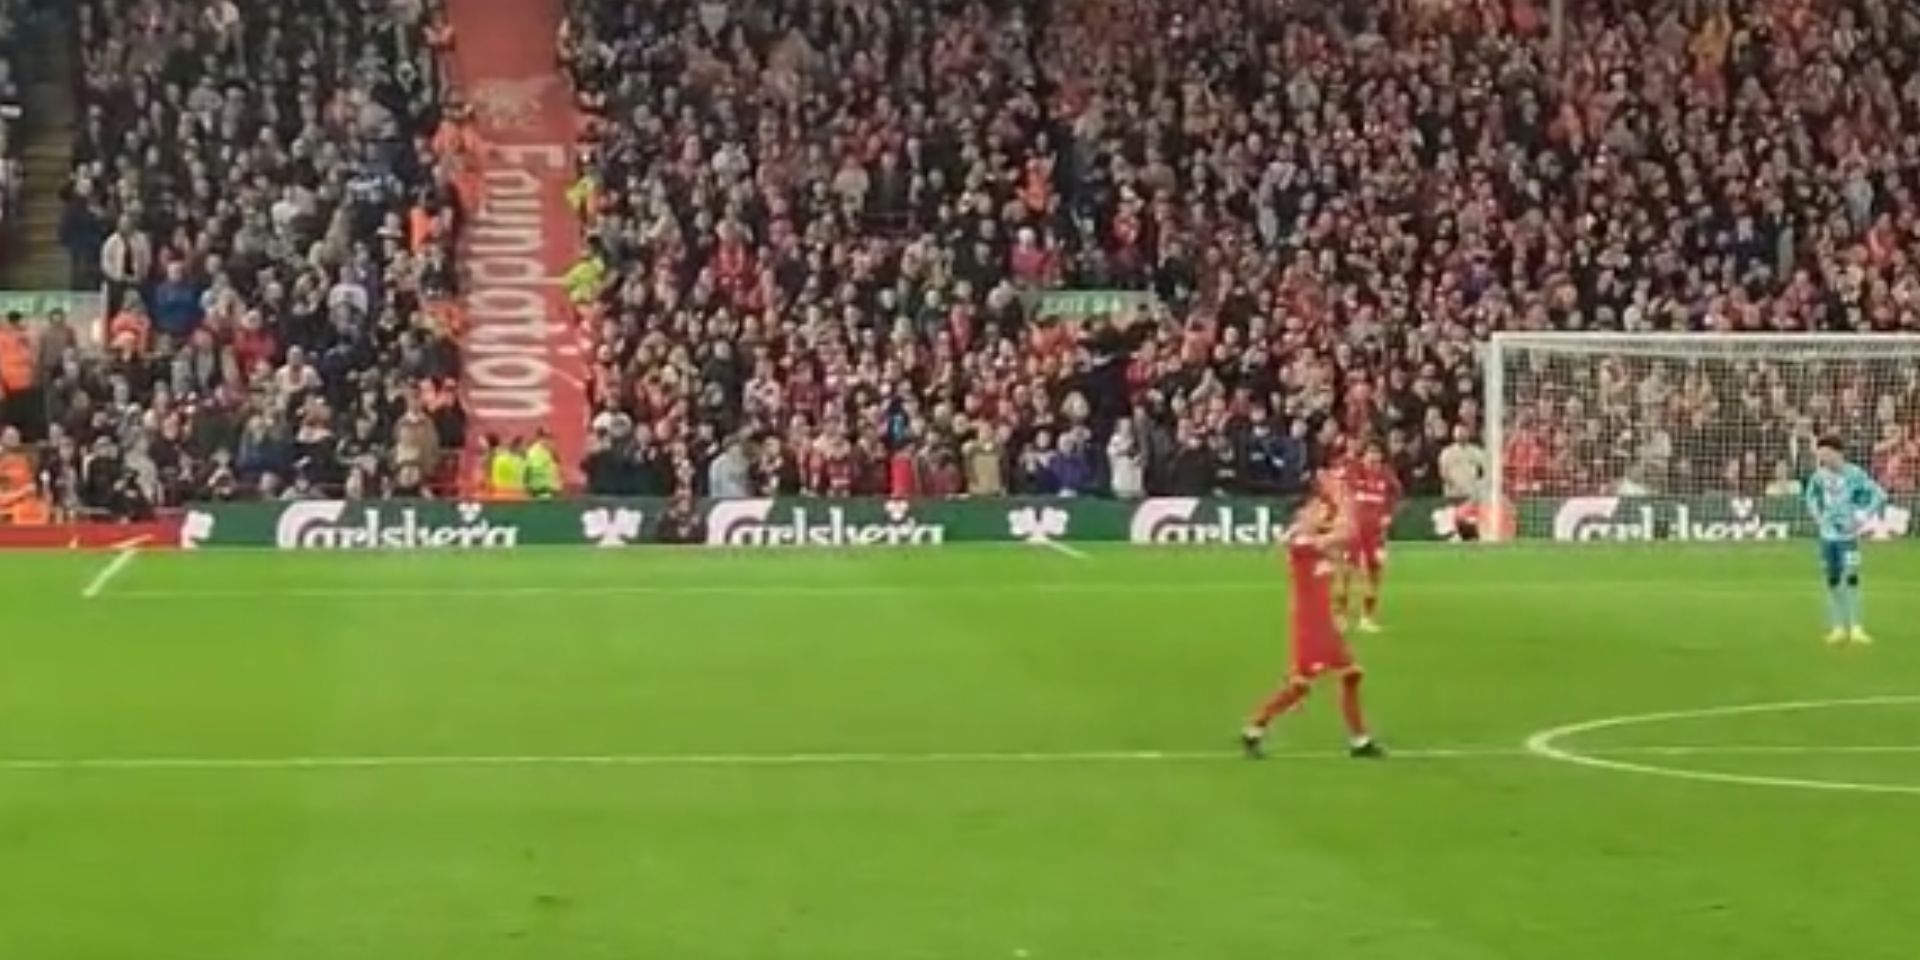 (Video) Anfield bursts into applause as Darwin Nunez is subbed off in final pre-World Cup appearance